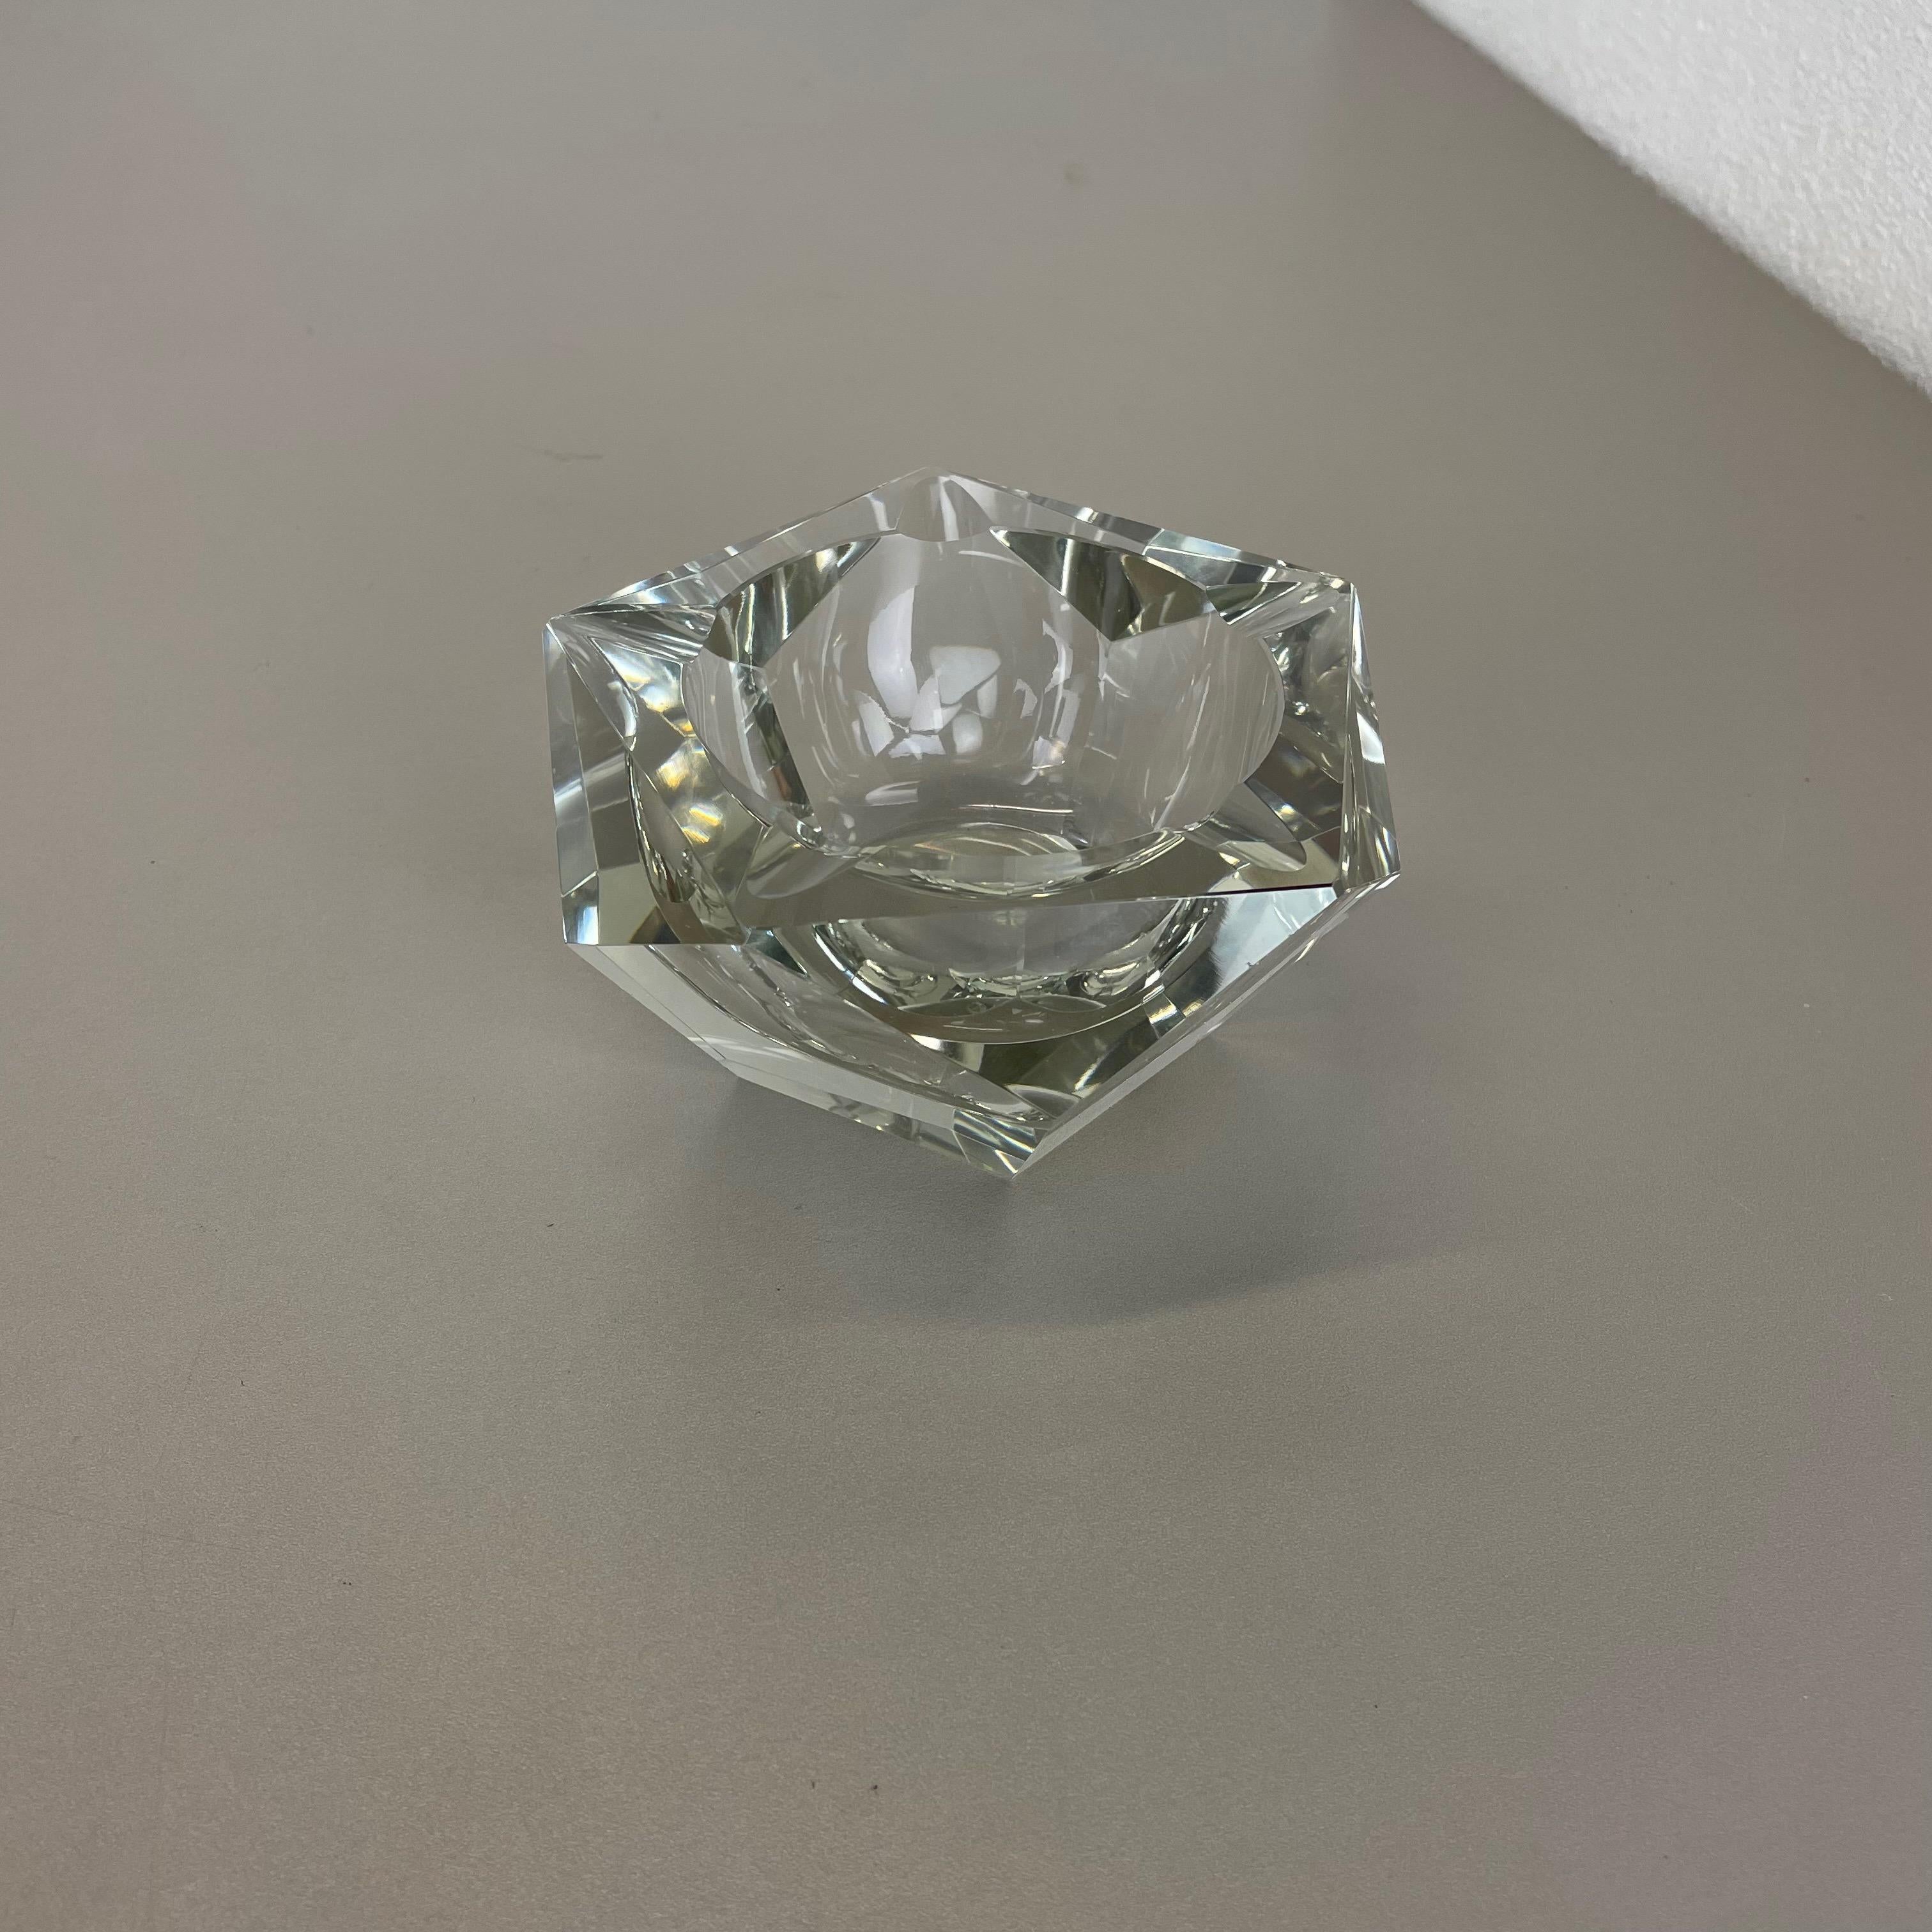 Mid-Century Modern Large Murano Faceted Diamond Lucid Bowl Ashtray Element, Italy, 1970s For Sale